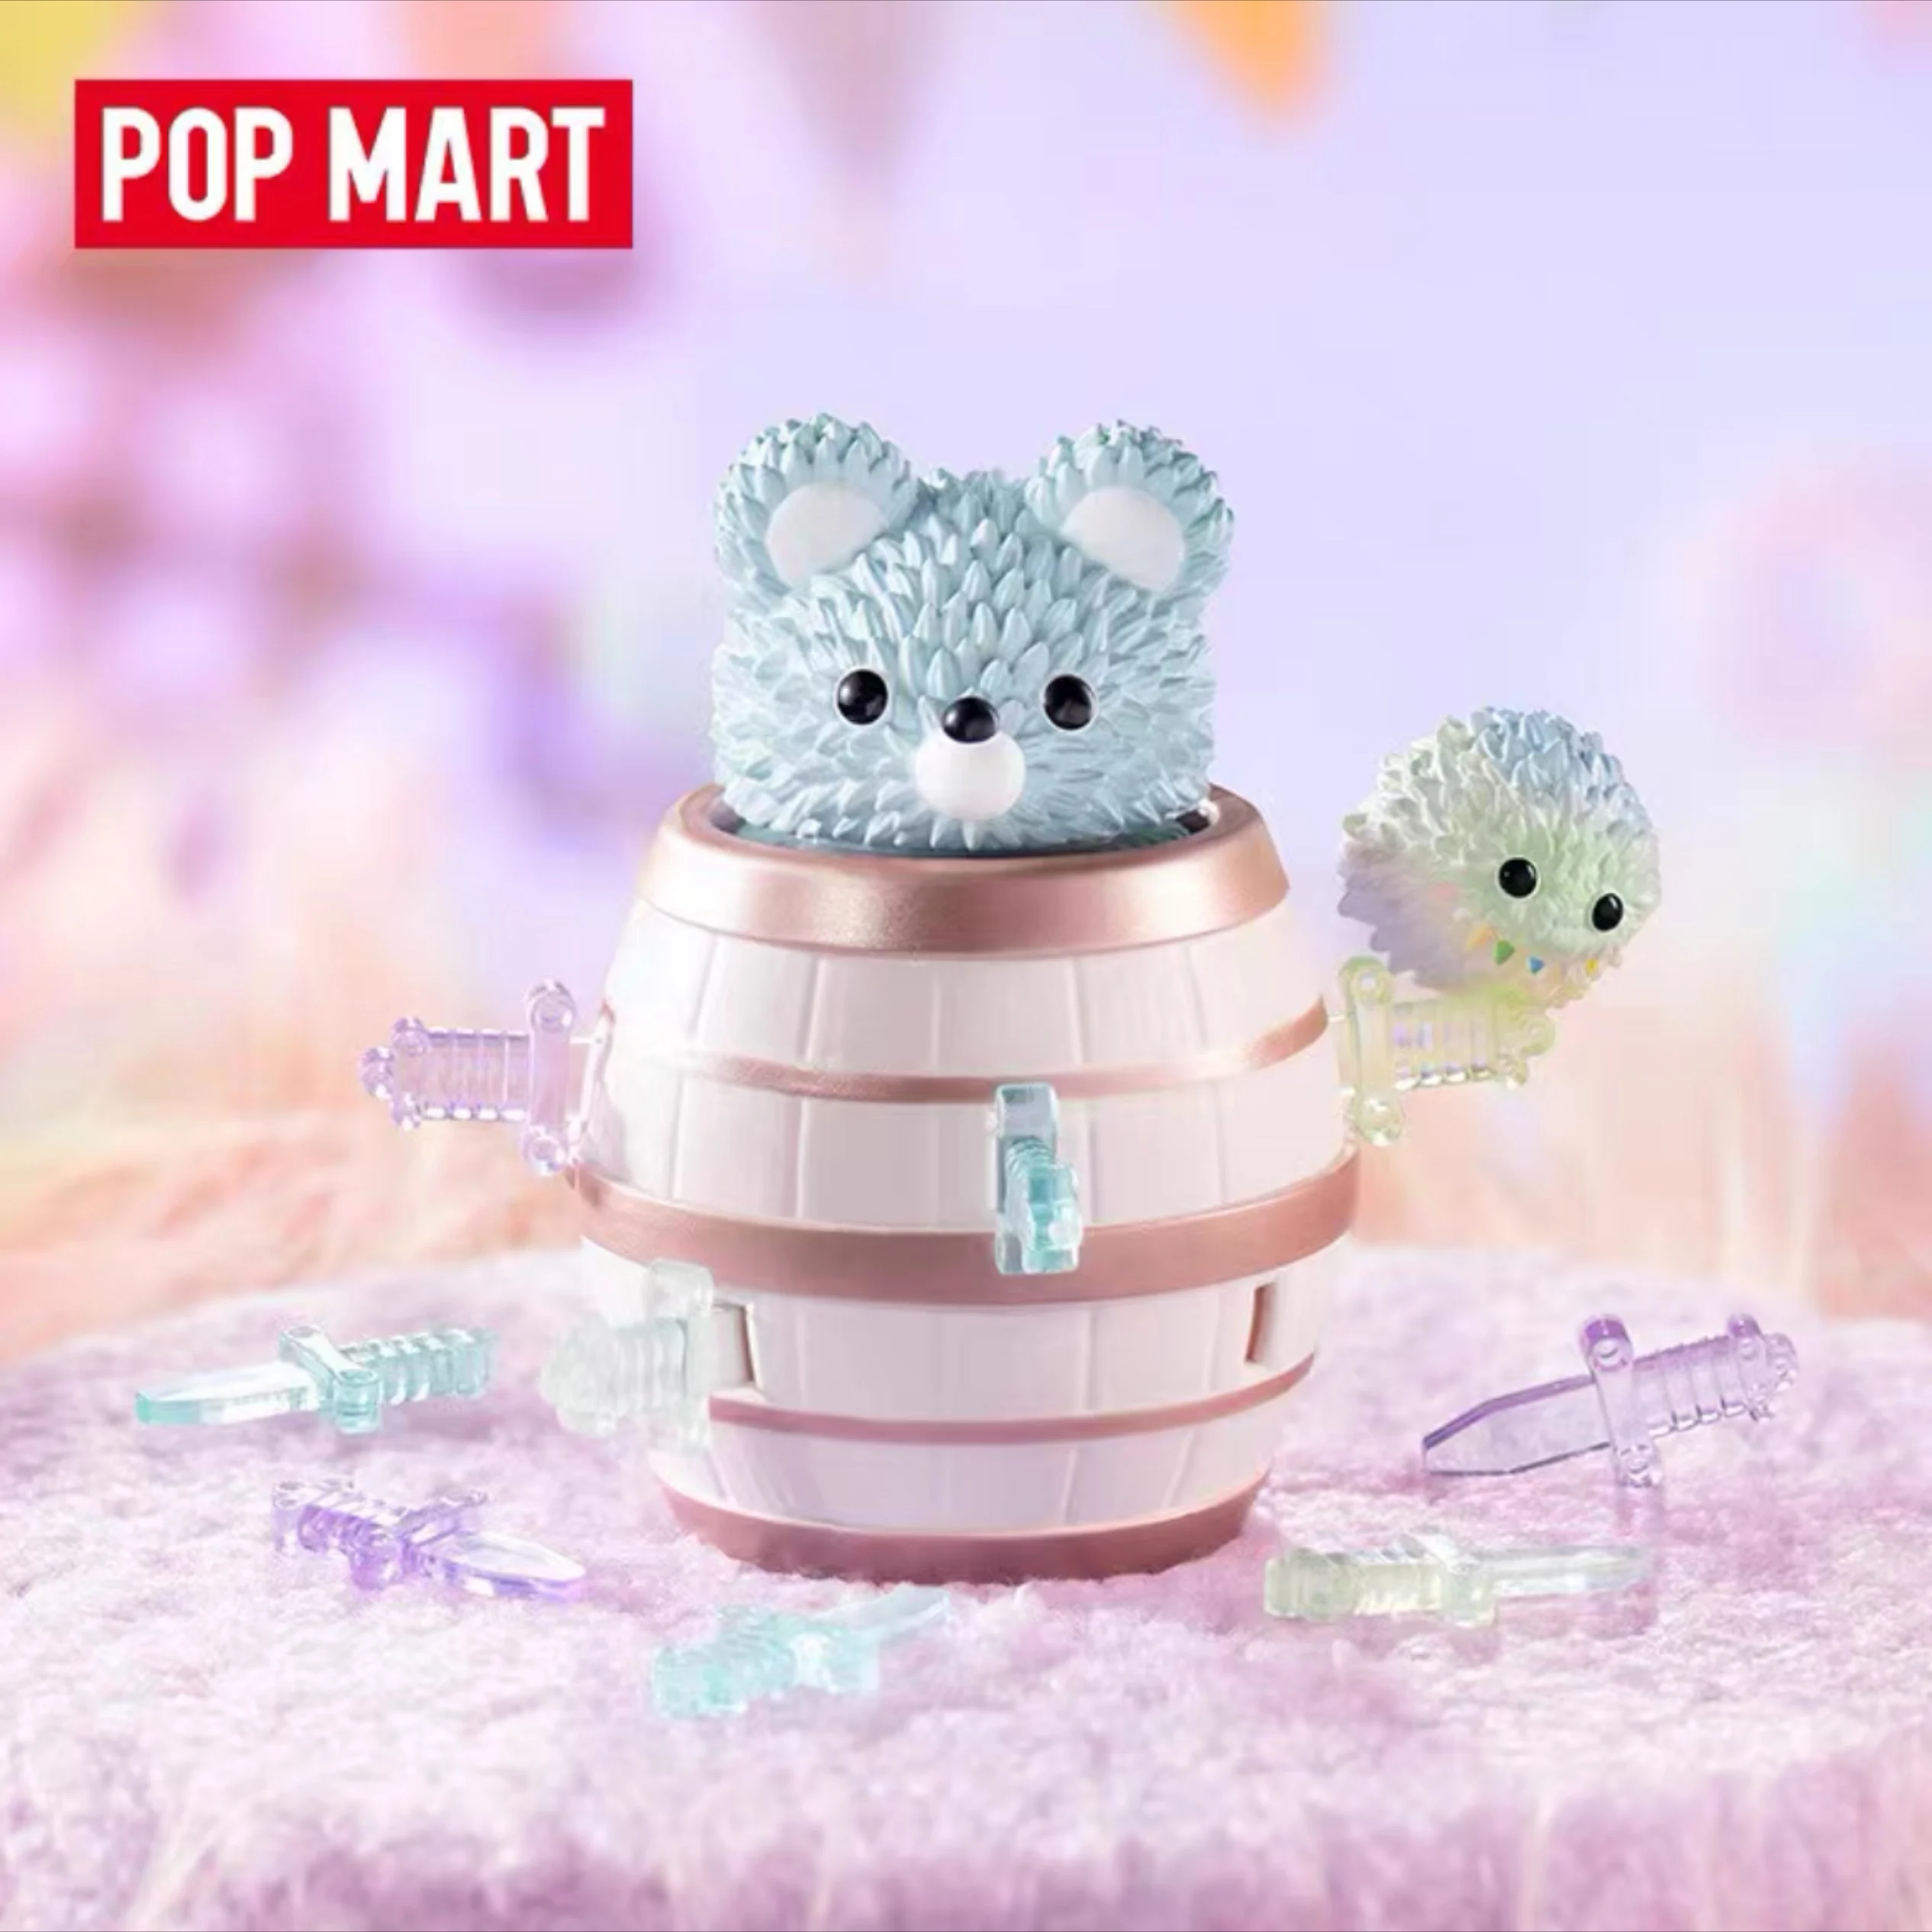 

POP MART INSTINCTOY Muckey Play Time Series Blind Box Toy Kawaii Doll Action Figure Toys Collectible Figurine Model Mystery Box